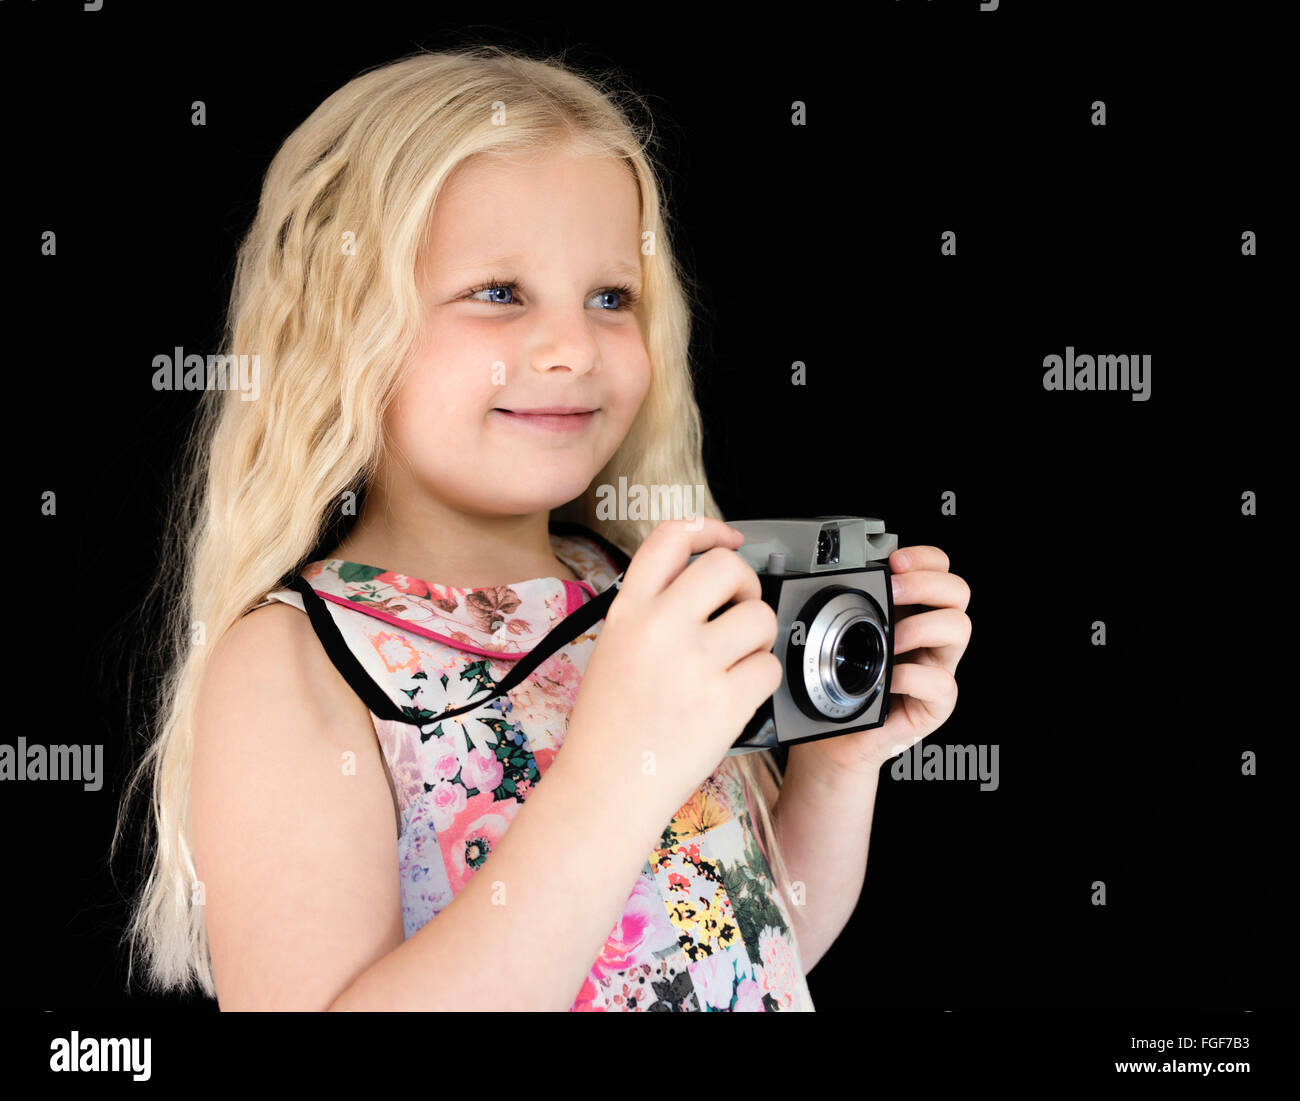 Young girl with long blonde hair holding a vintage camera smiling Stock Photo